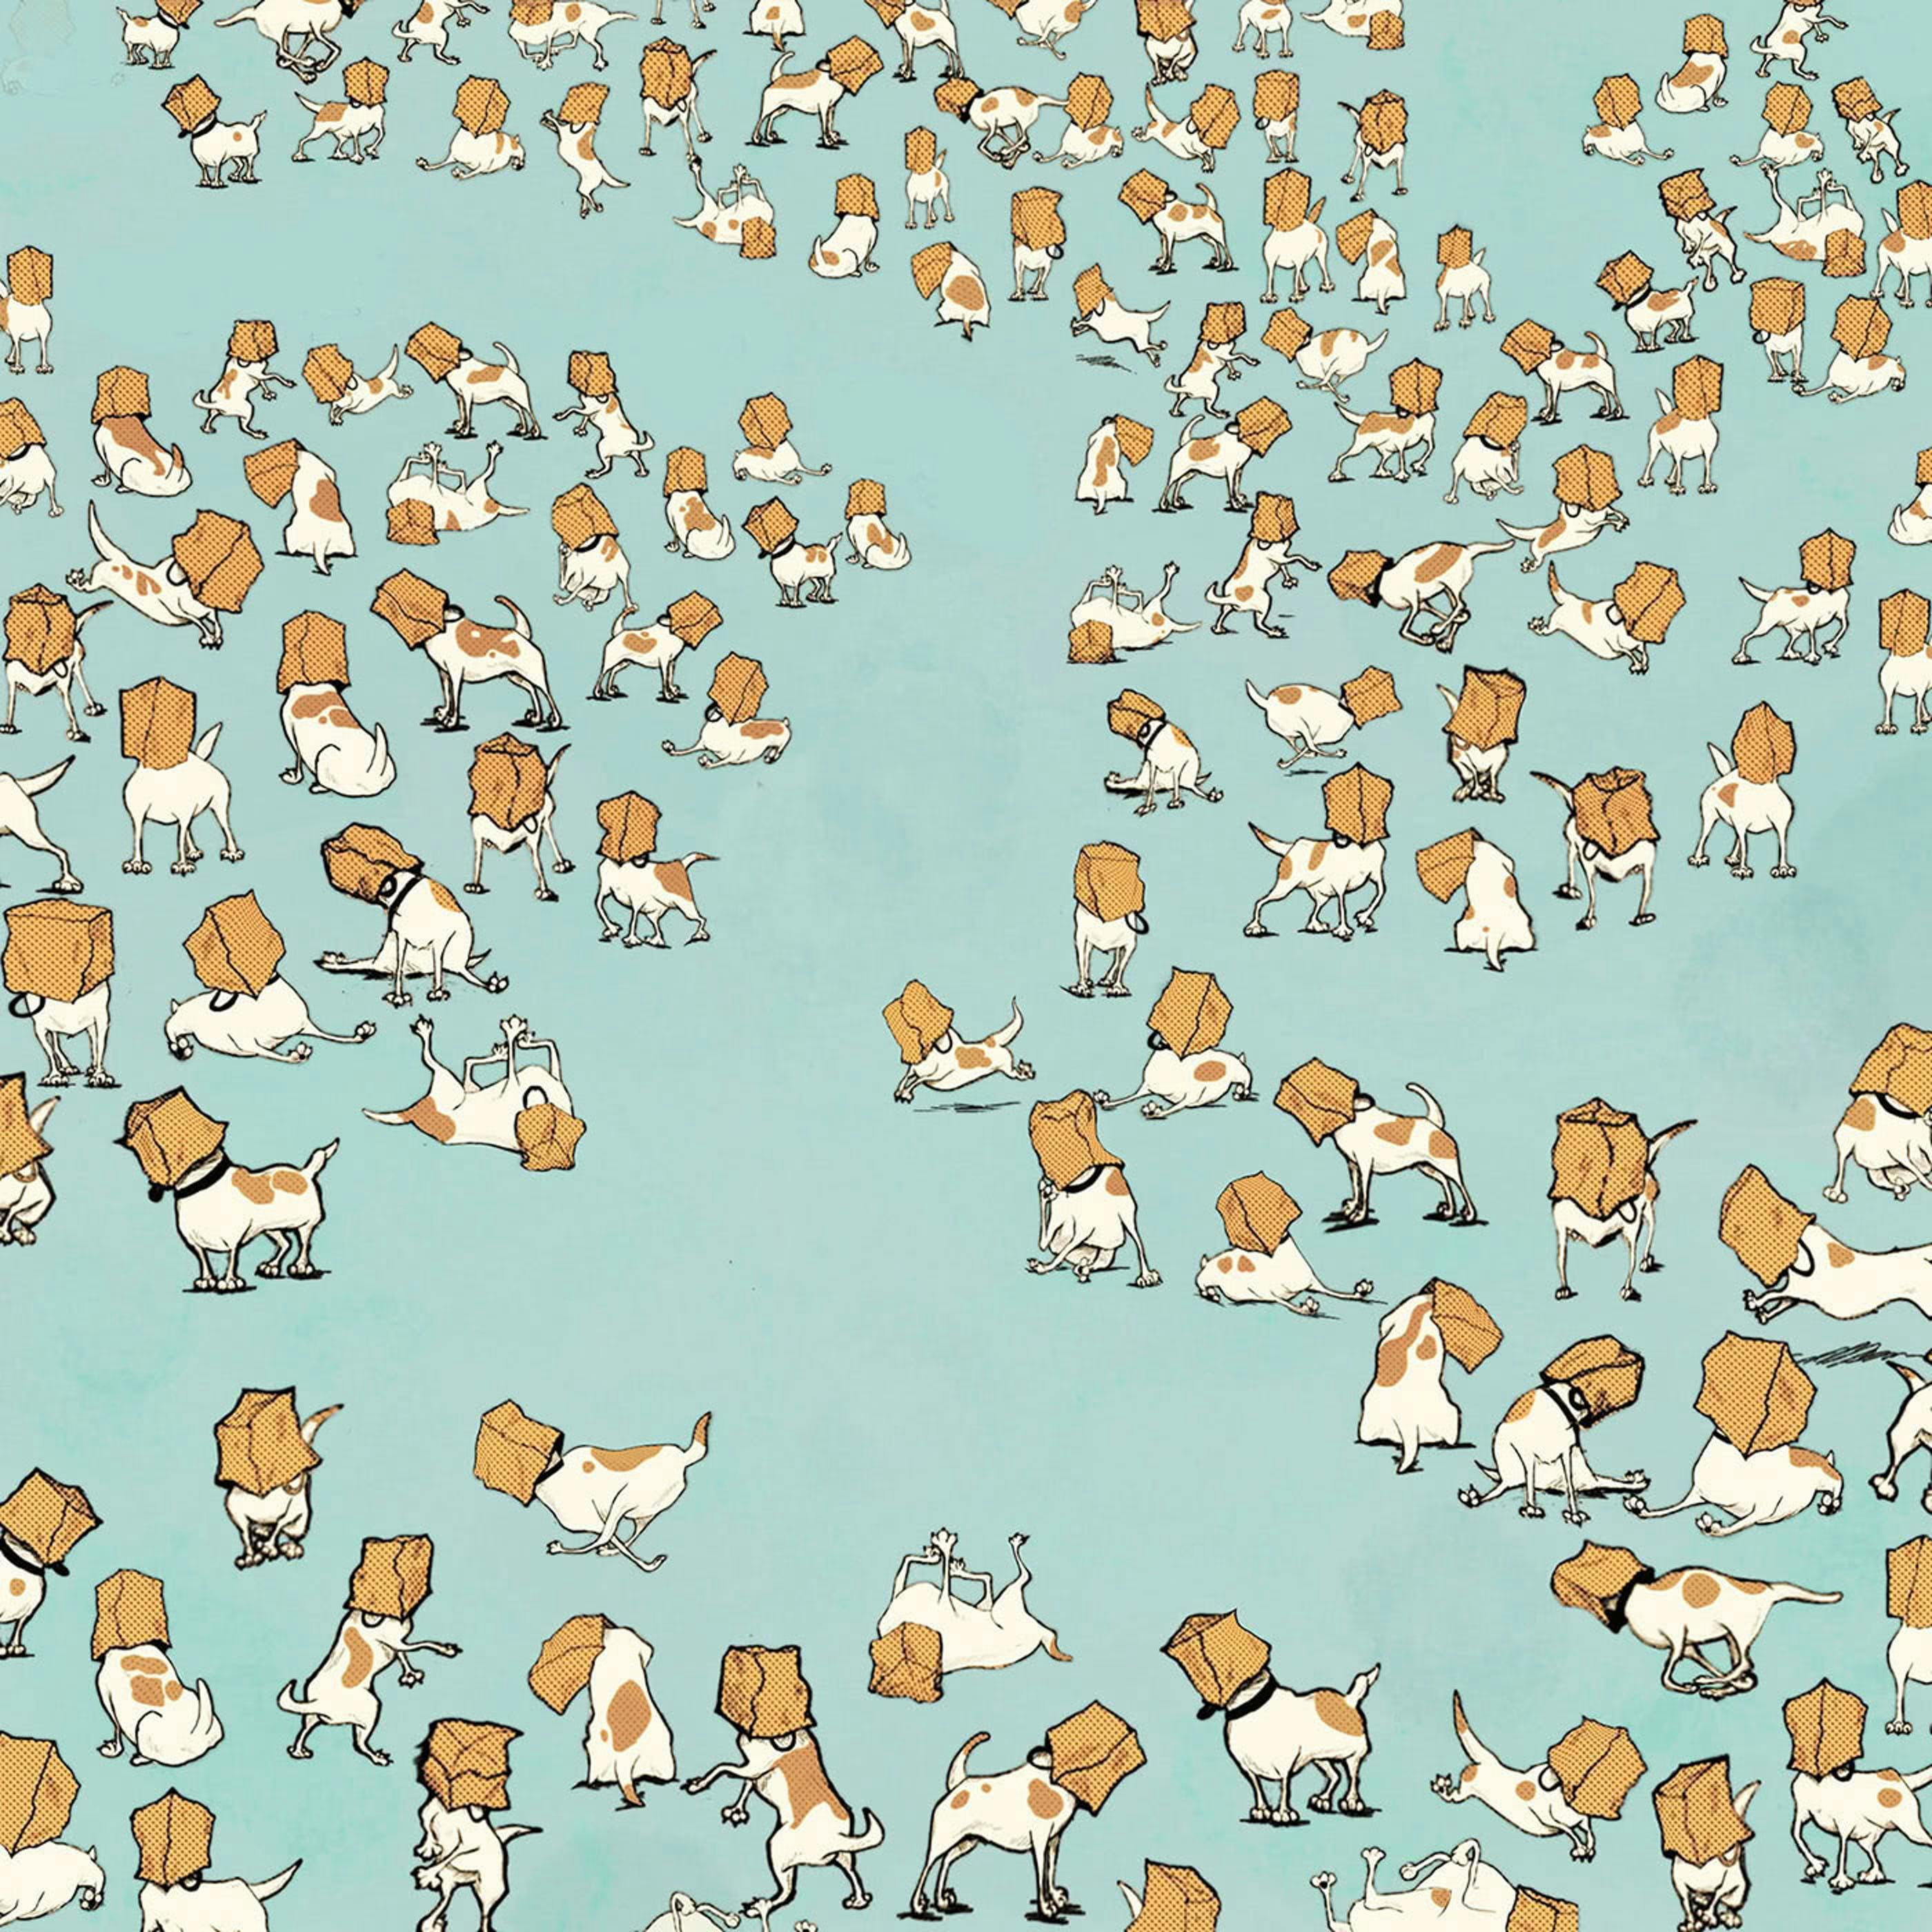 illustration representing 25,000 Jack Russell terriers with their heads stuck in paper sacks